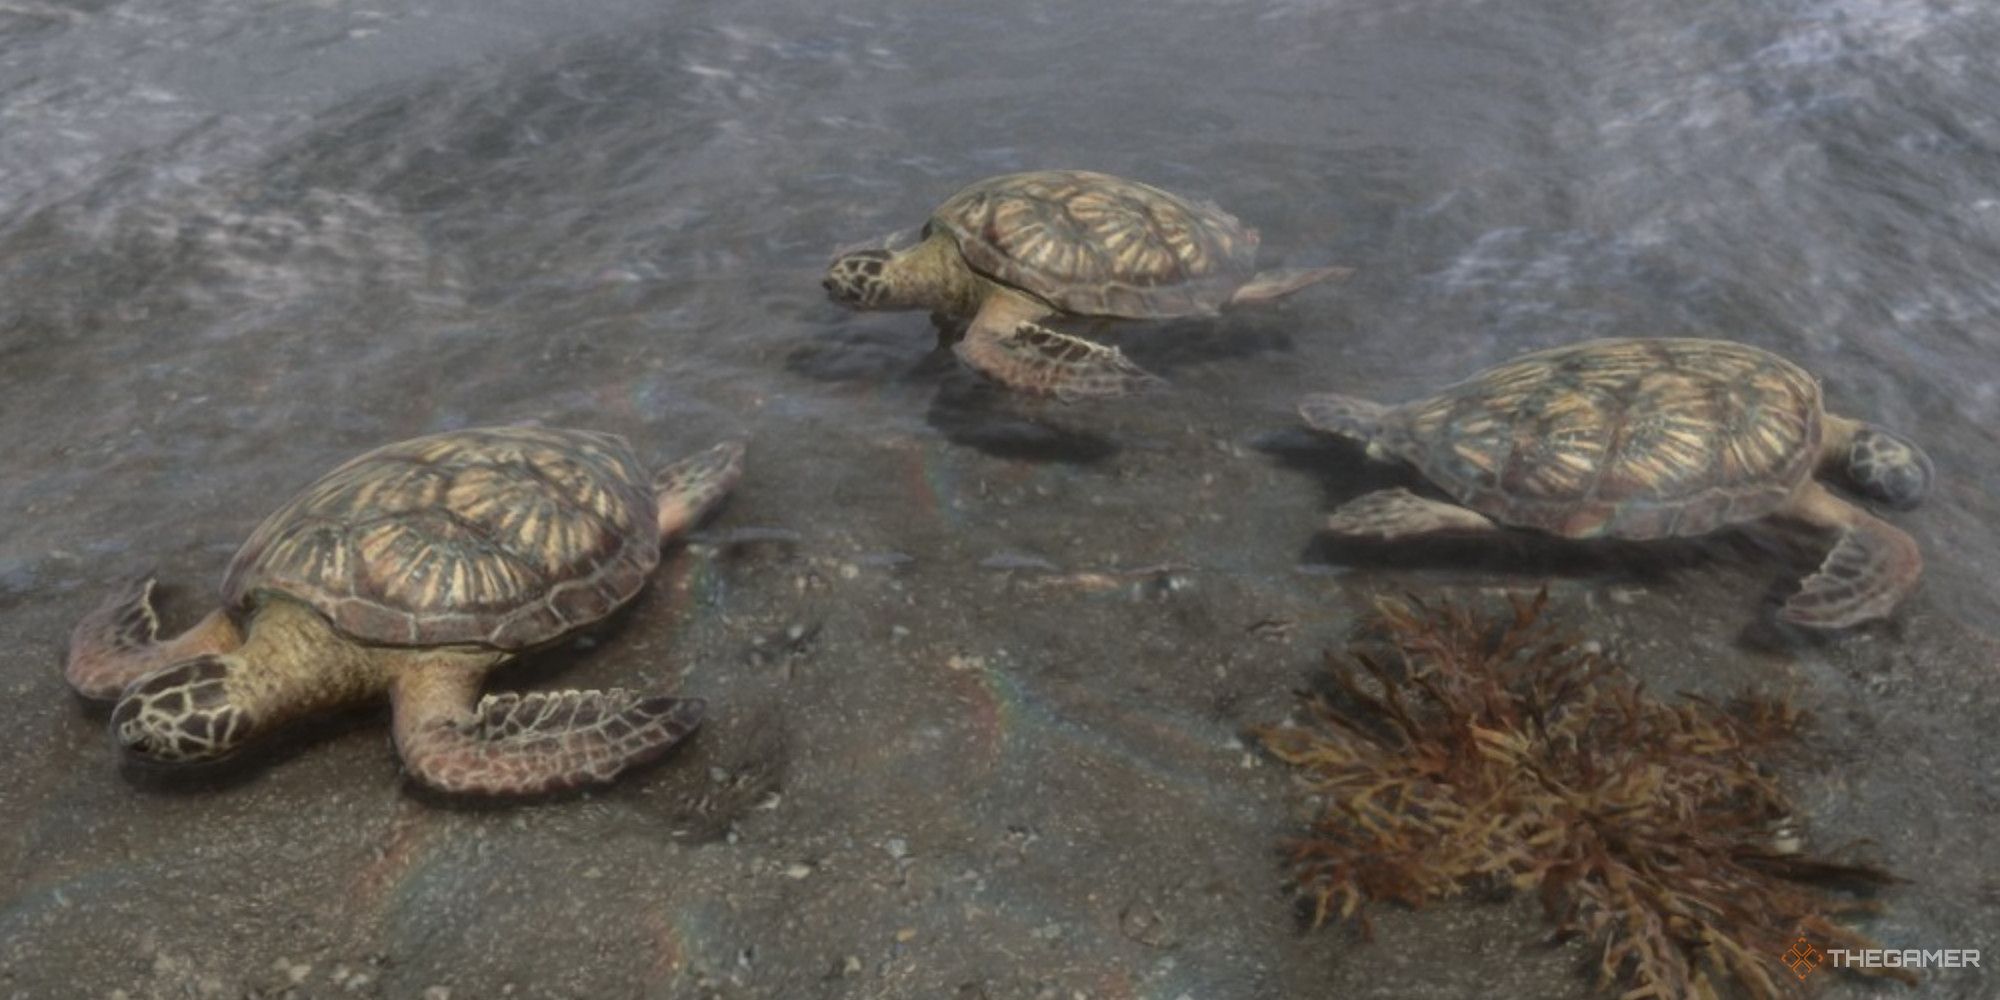 A screenshot from Sons of the Forest showing a grouping of three turtles in the shallow parts of the water on a beach.